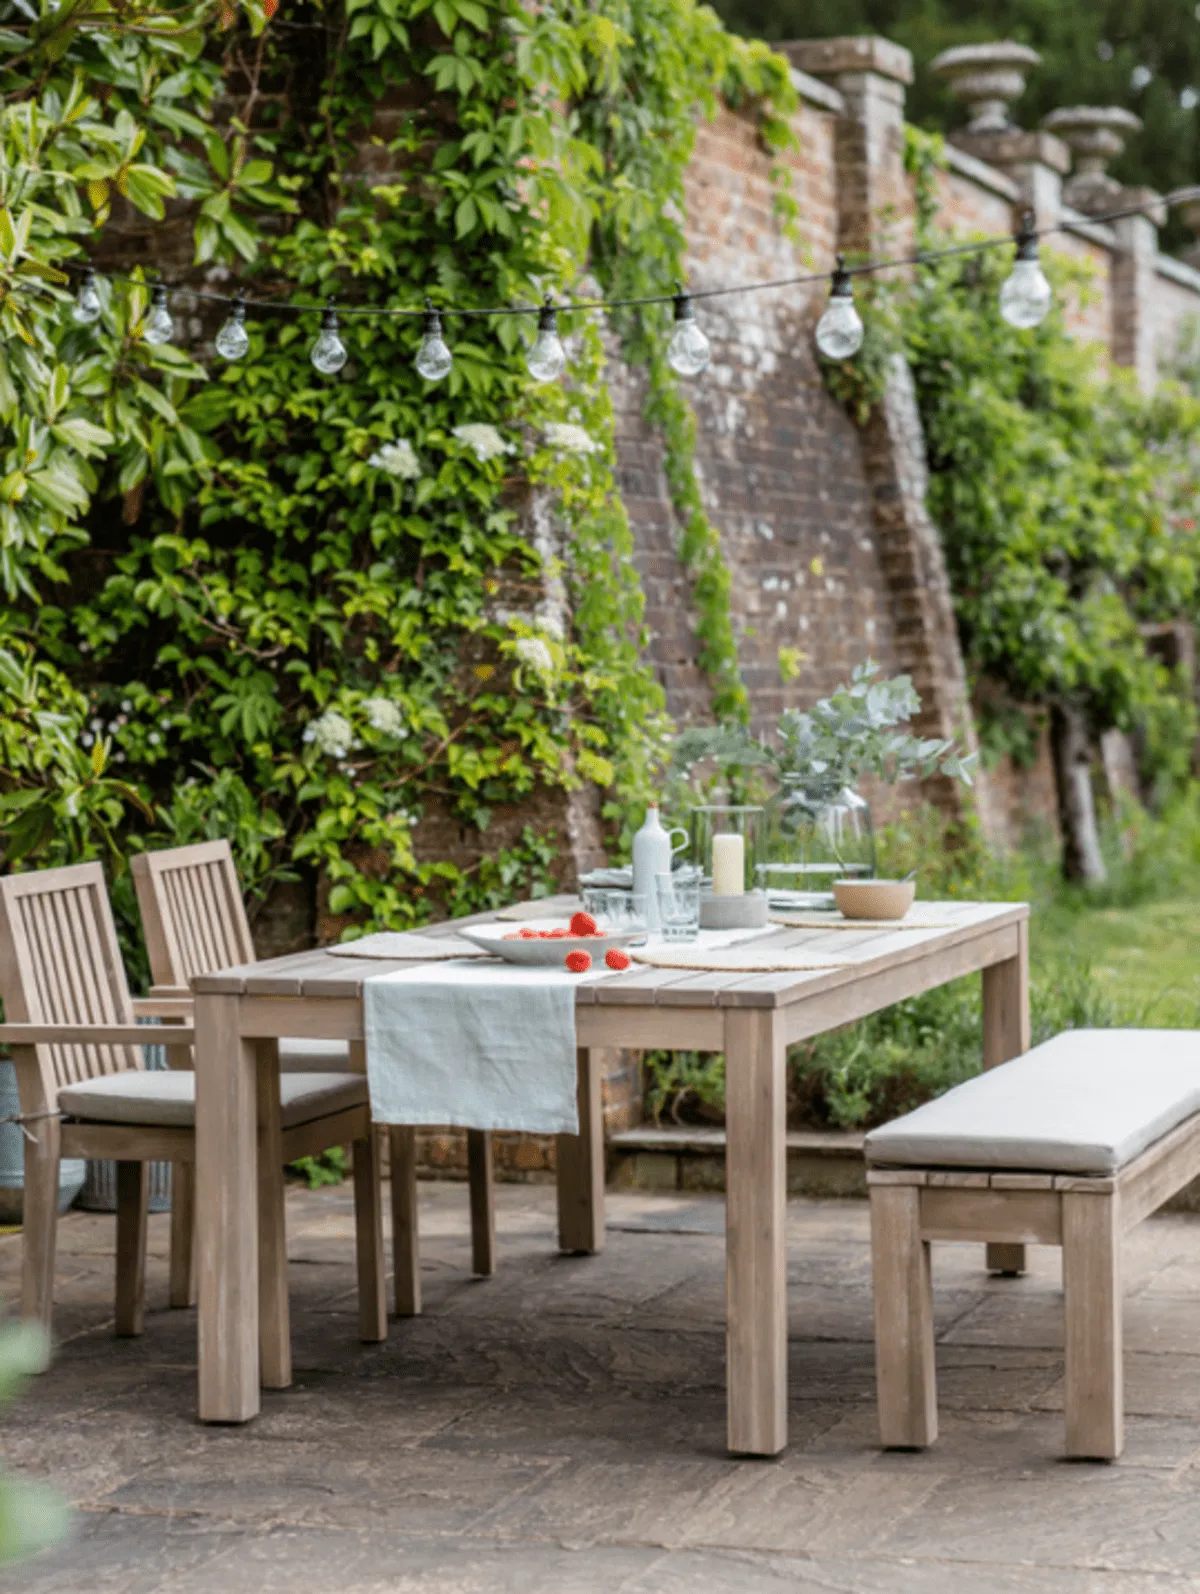 Medium wooden table laid for lunch with bench and two armchairs in a walled garden 